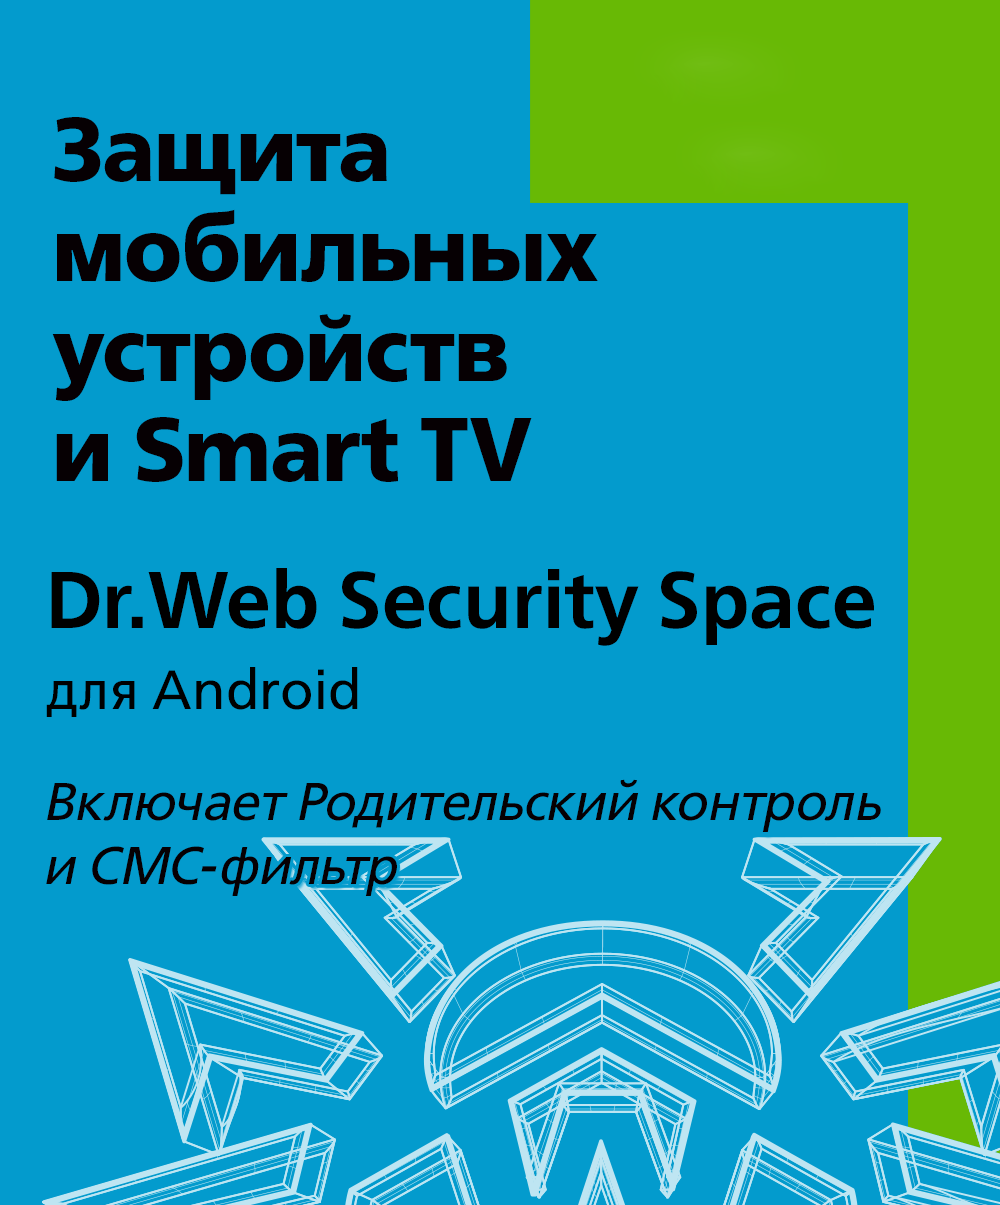 Dr.Web Security Space (for mobile devices) - for 2 devices, for 36 months, KZ